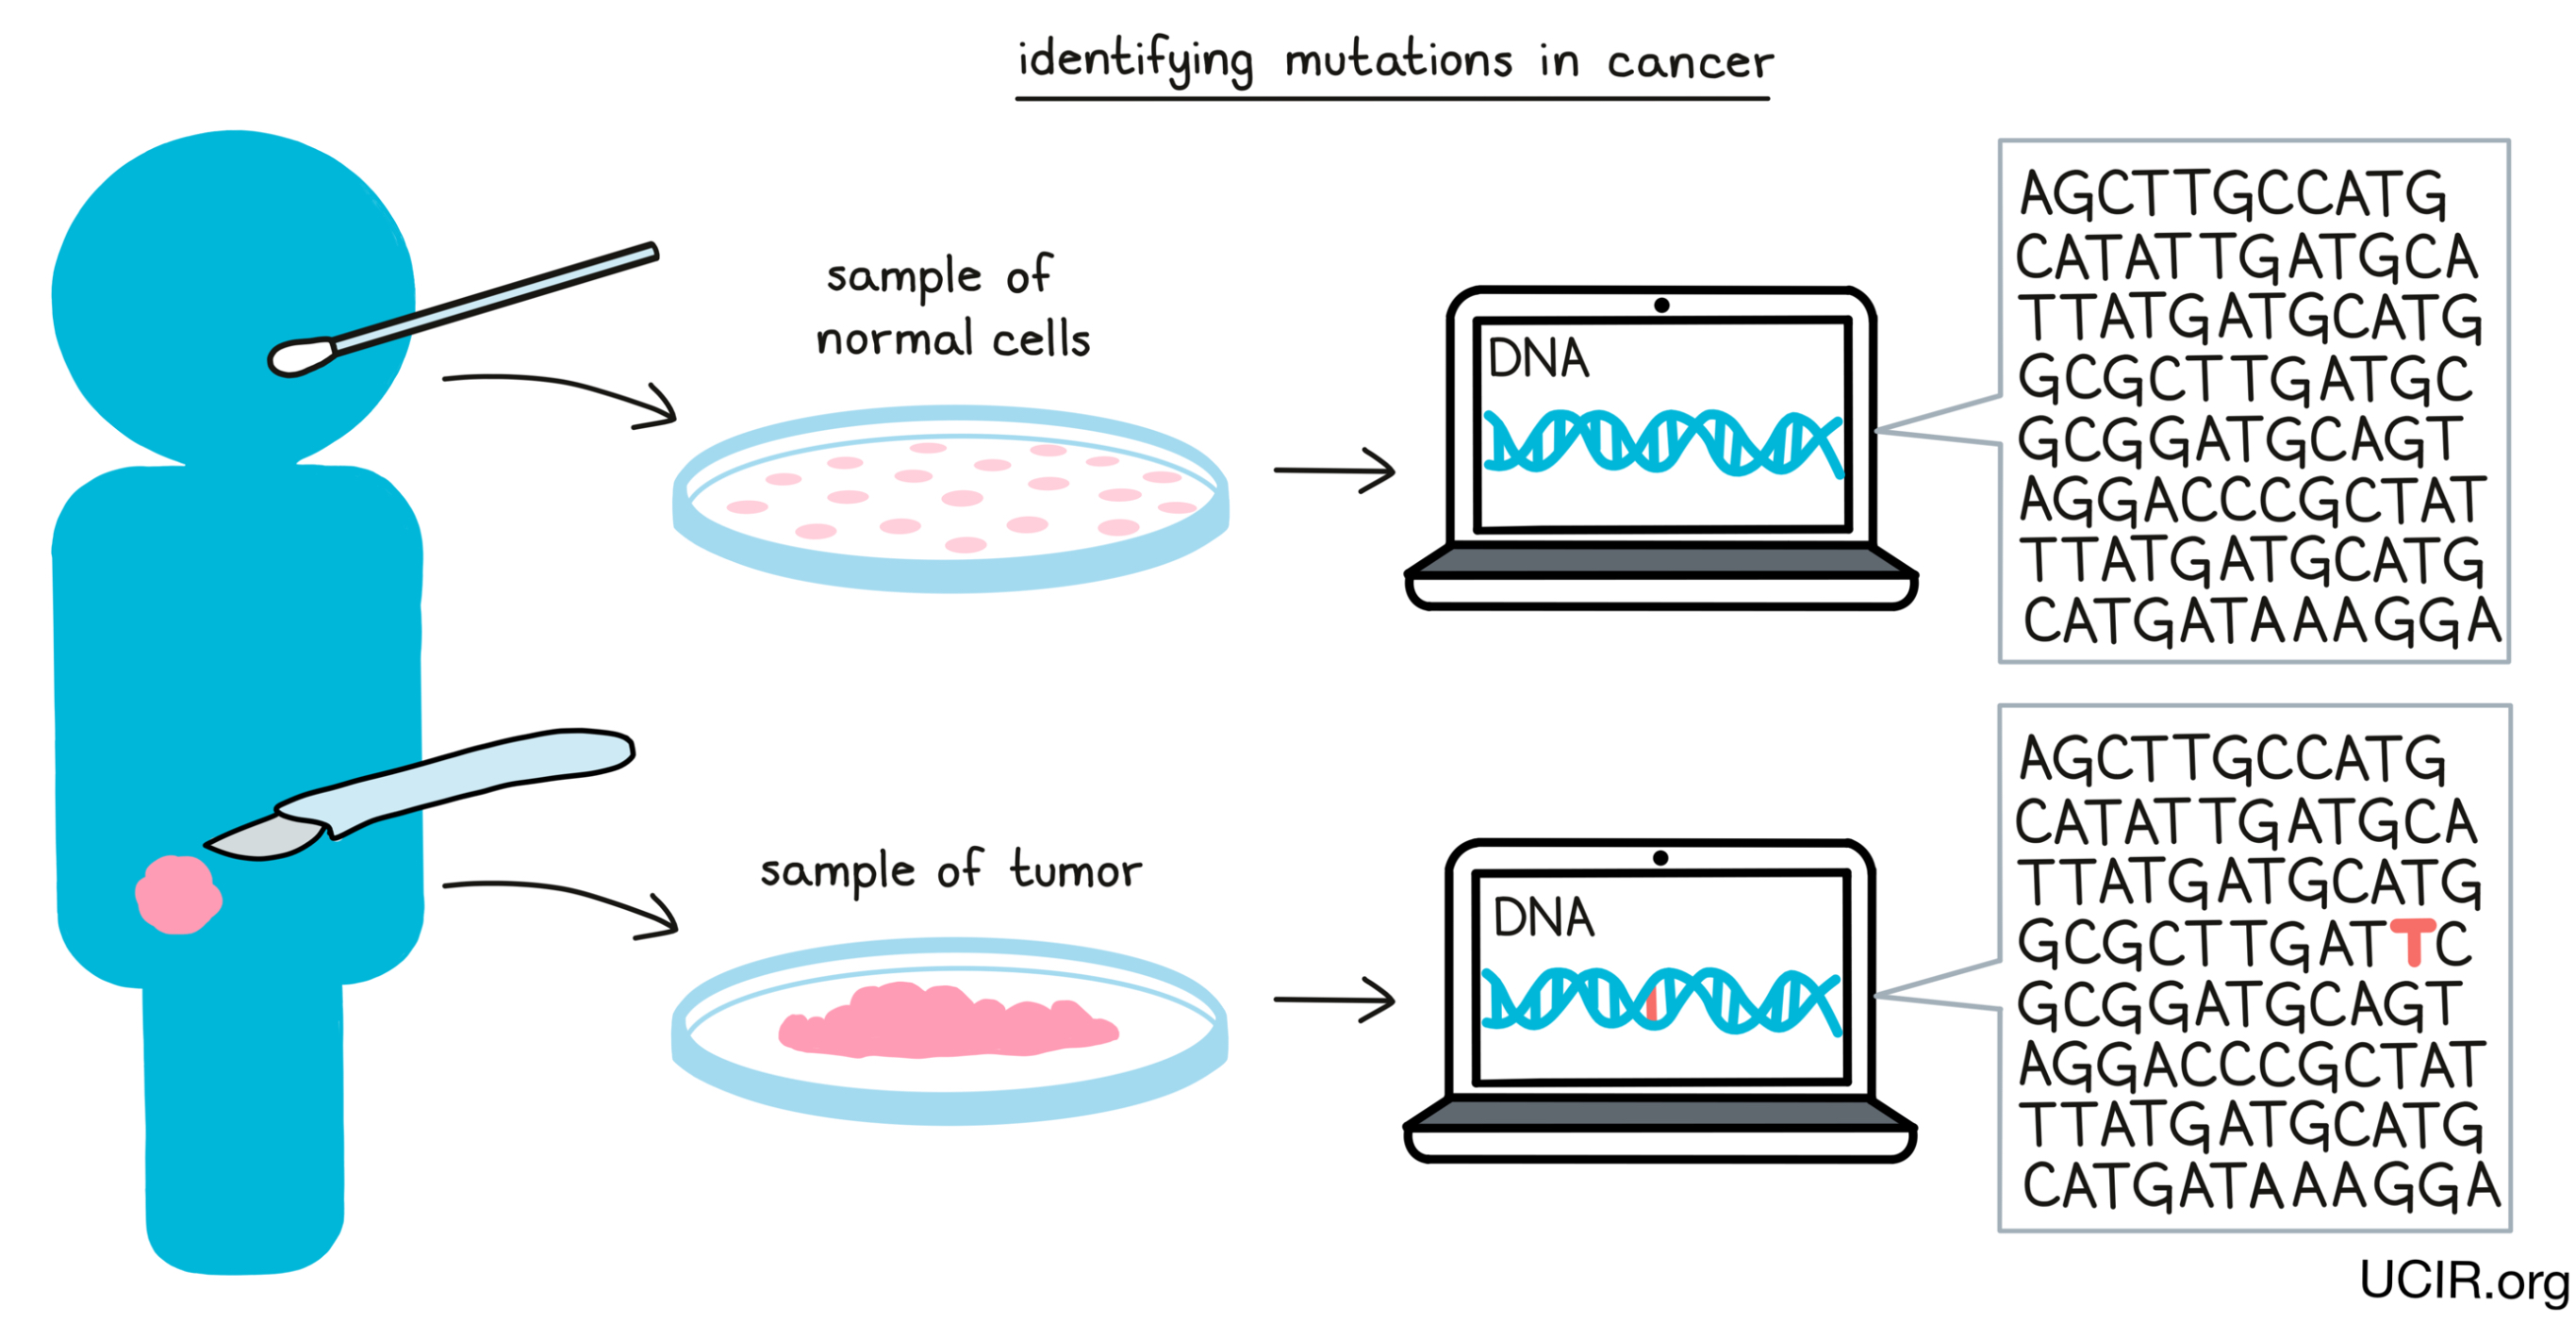 Illustration showing how mutations in cancer are identified